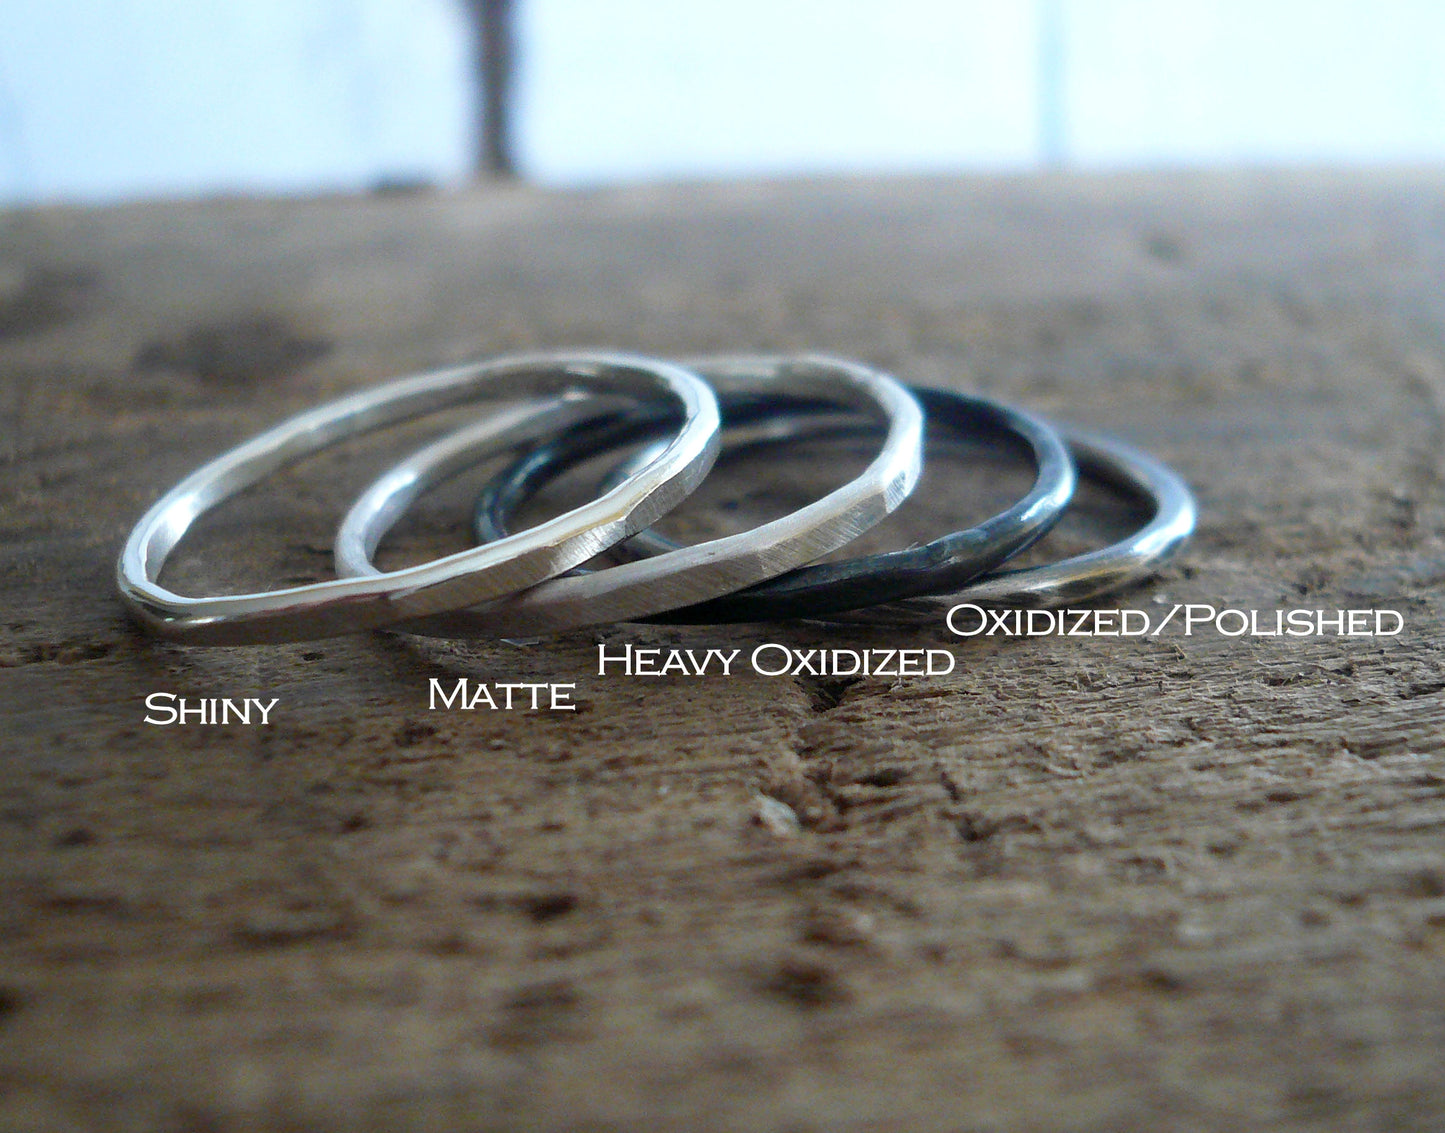 Every Day Ring - Sterling Silver Stacking Ring. Handmade. Hand forged.